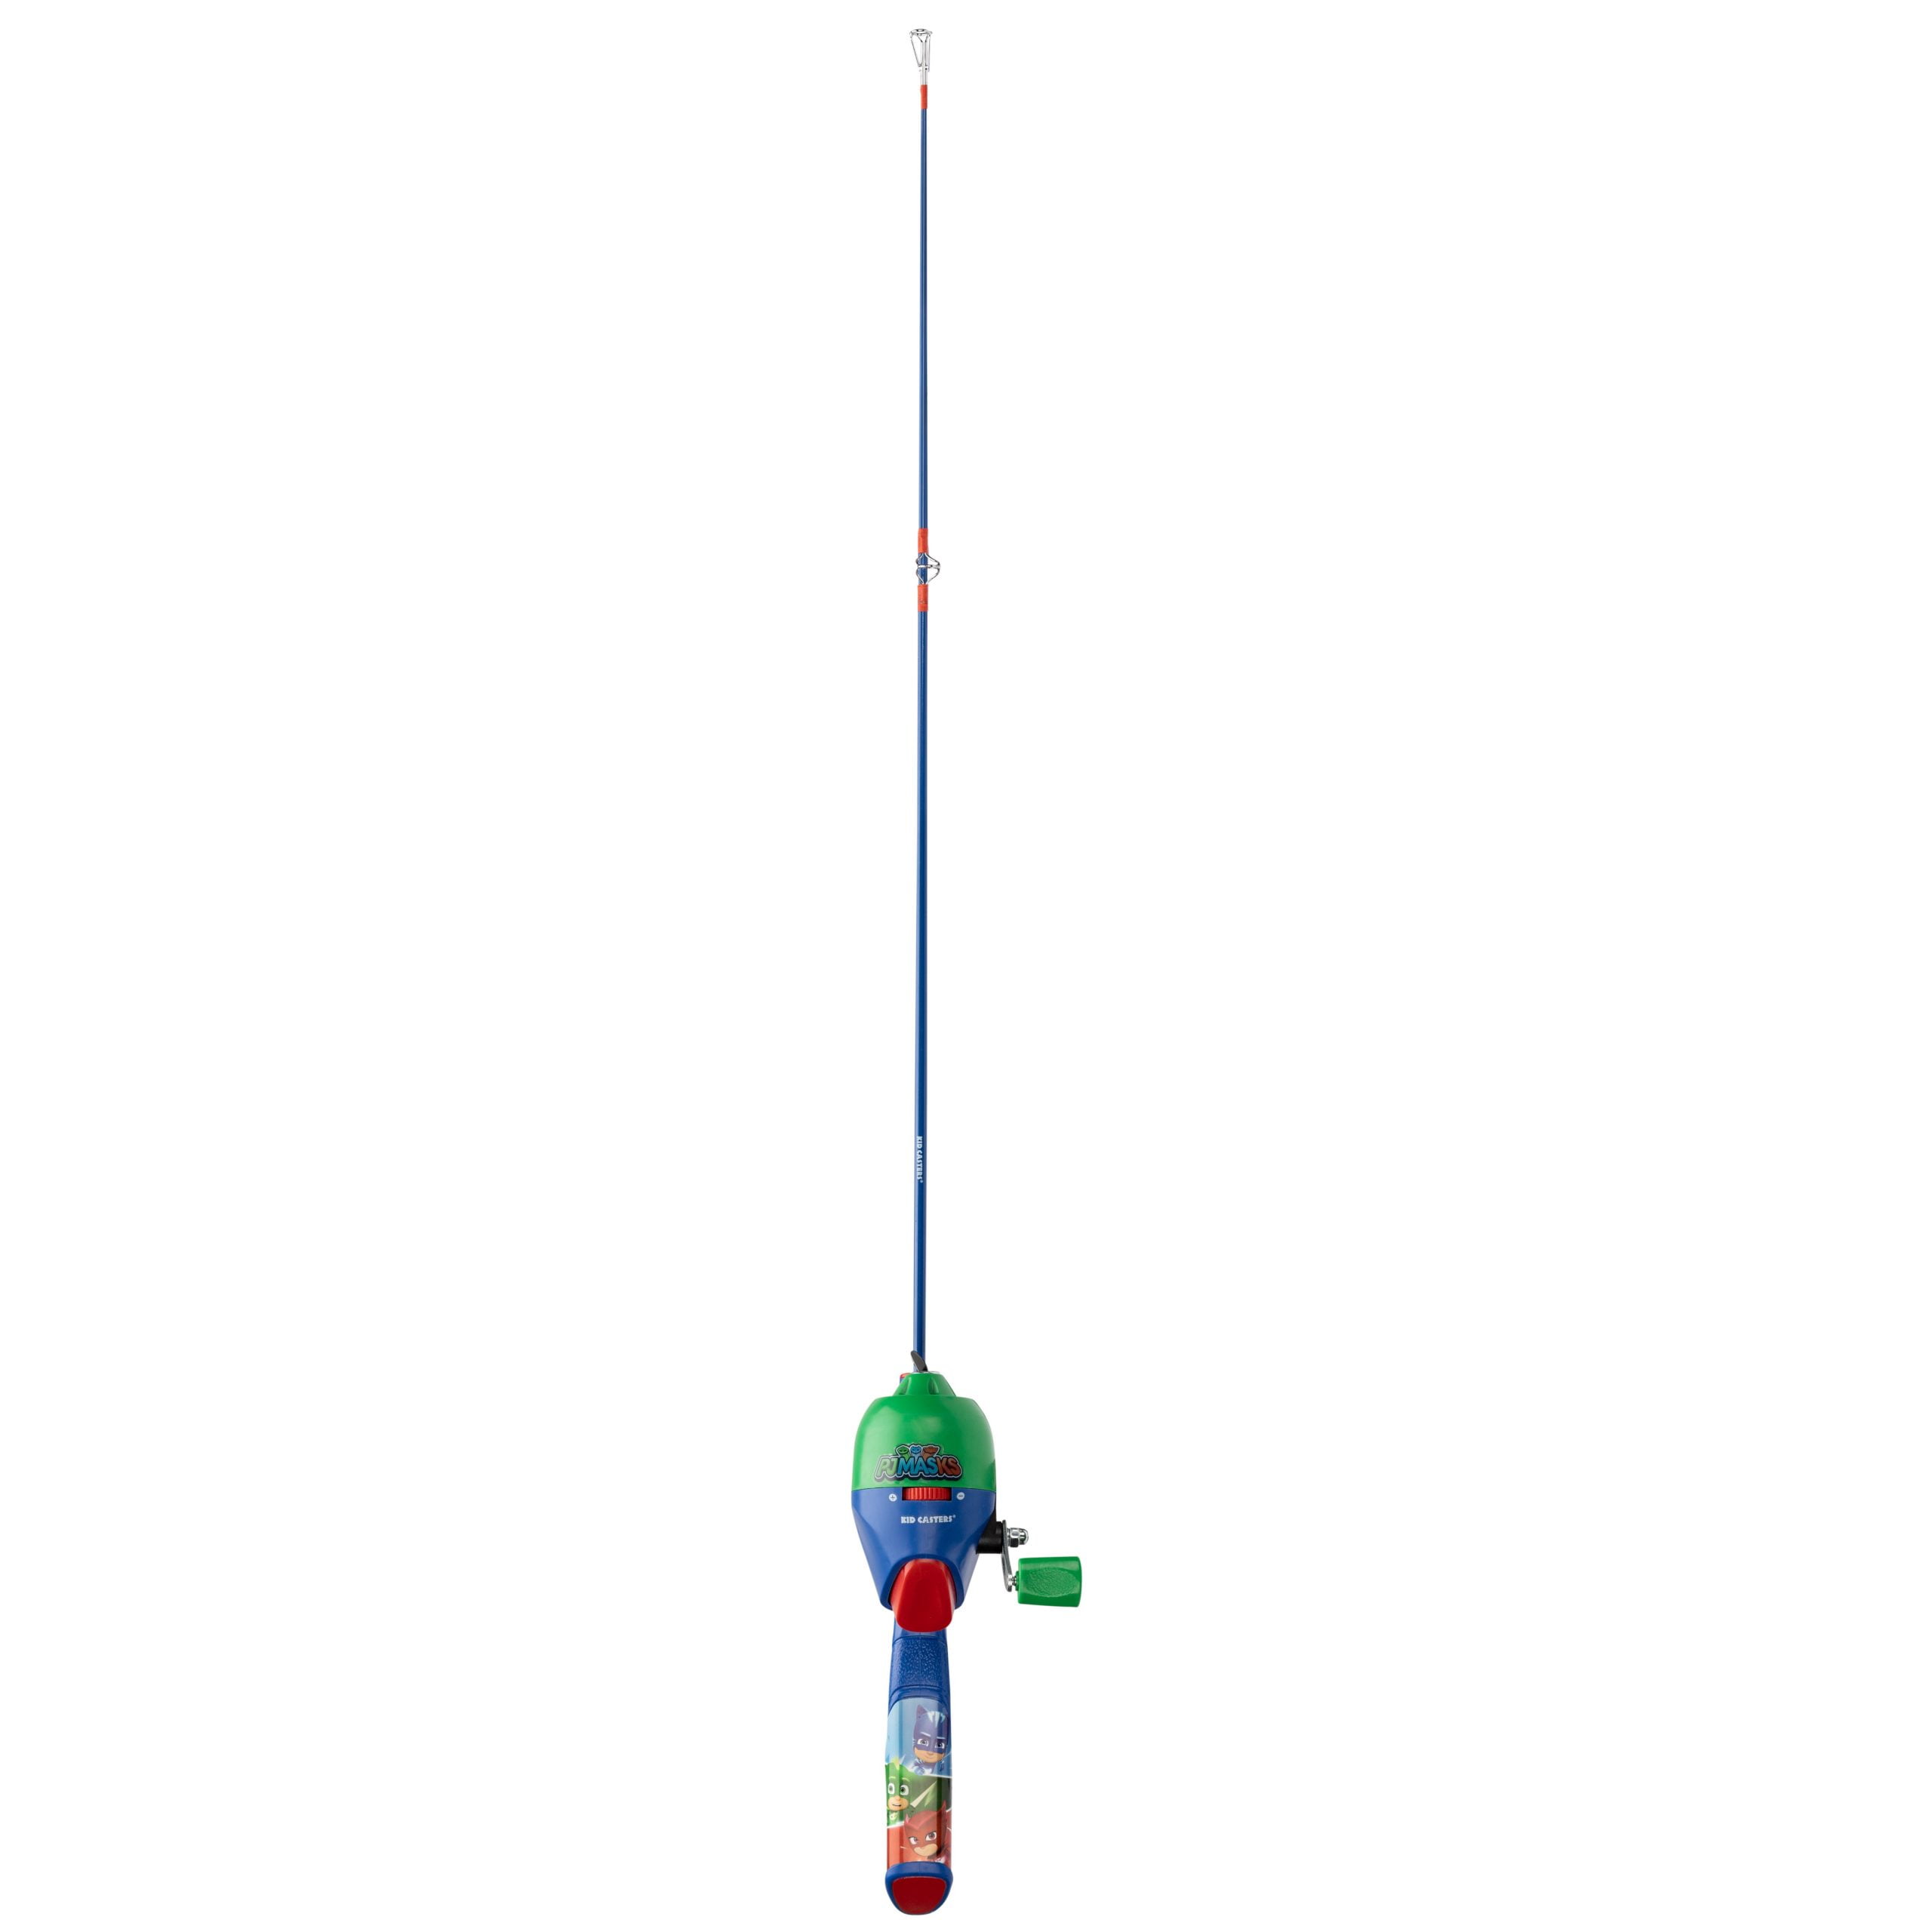 Eccomum Kids Fishing Pole with Spincast Reel Telescopic Fishing Rod Combo Full Kits for Boys, Girls, and Adults, Size: 47, Blue